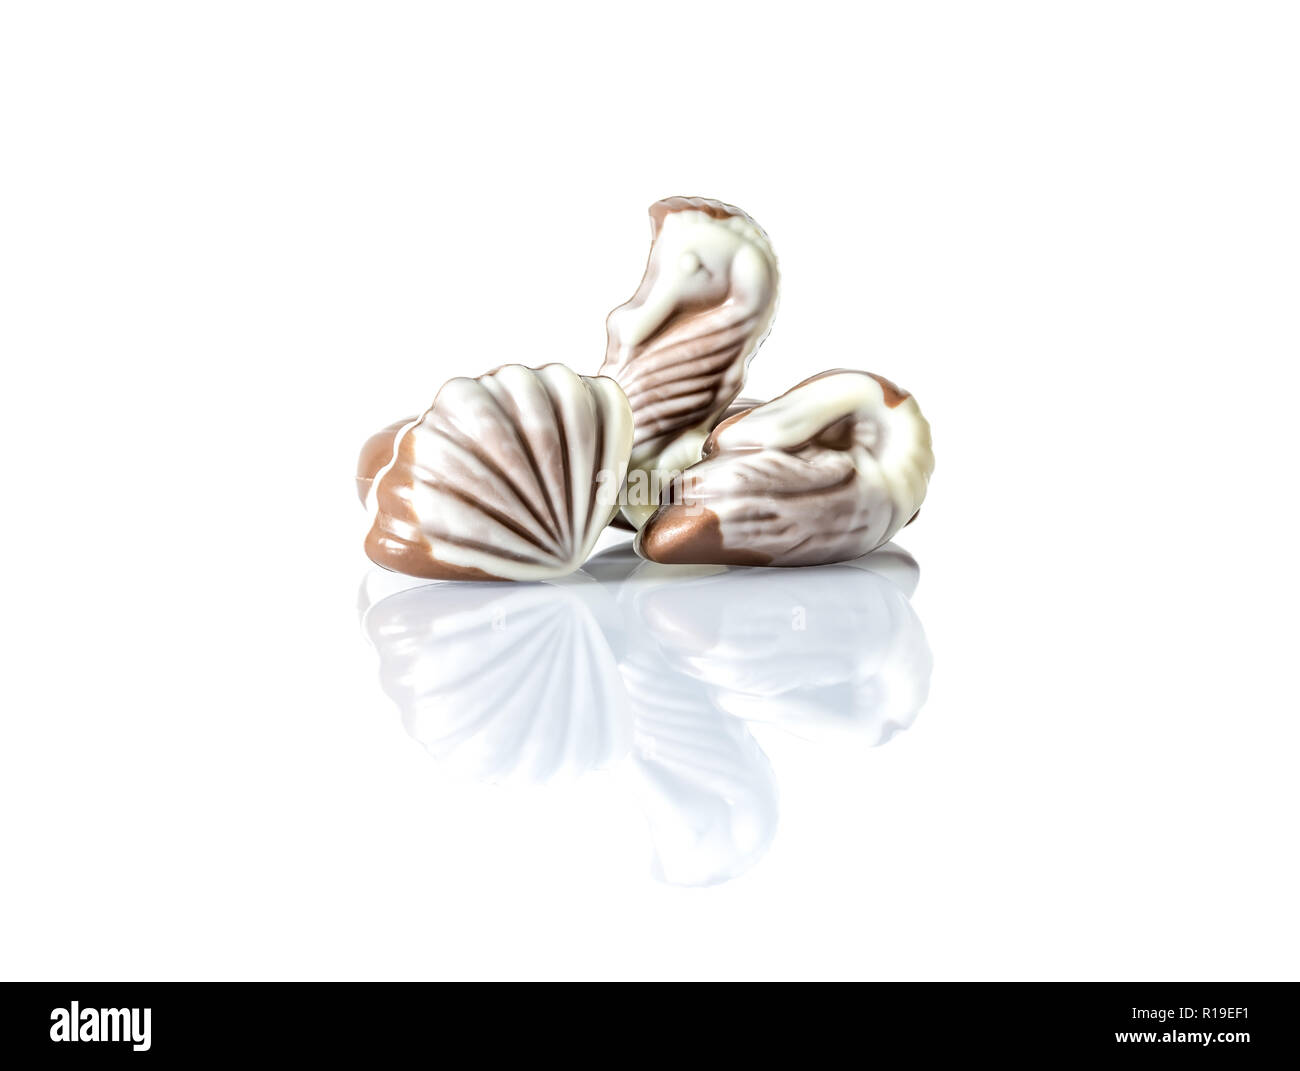 Chocolate candy in the form of sea shells on white table with reflection isolated on white background Stock Photo